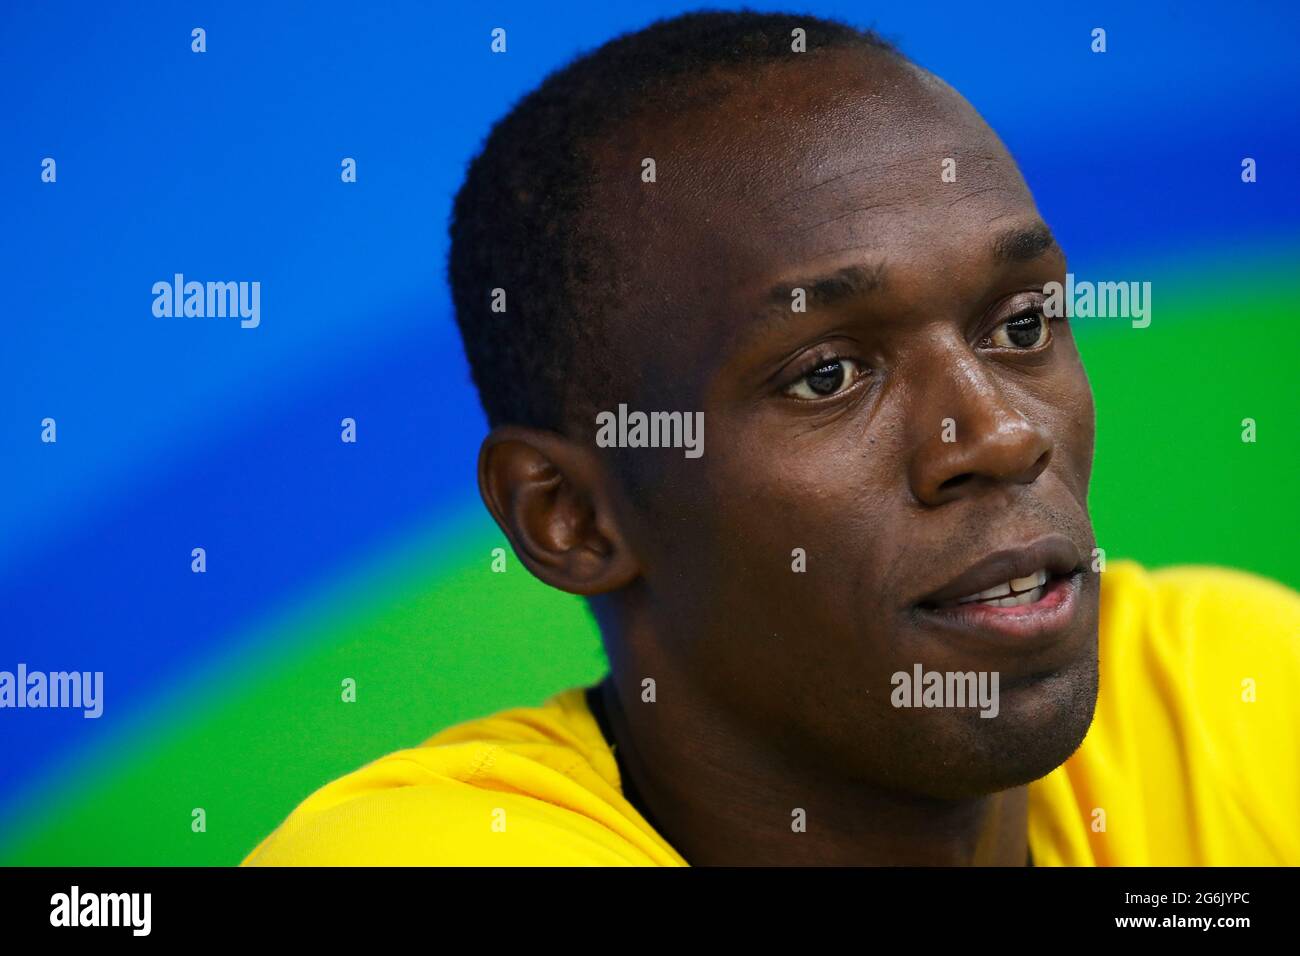 Usain Bolt of Jamaica portrait at Rio 2016 Olympic Games. Jamaican sprinter wins gold medal 100m sprint race final track and field Stock Photo